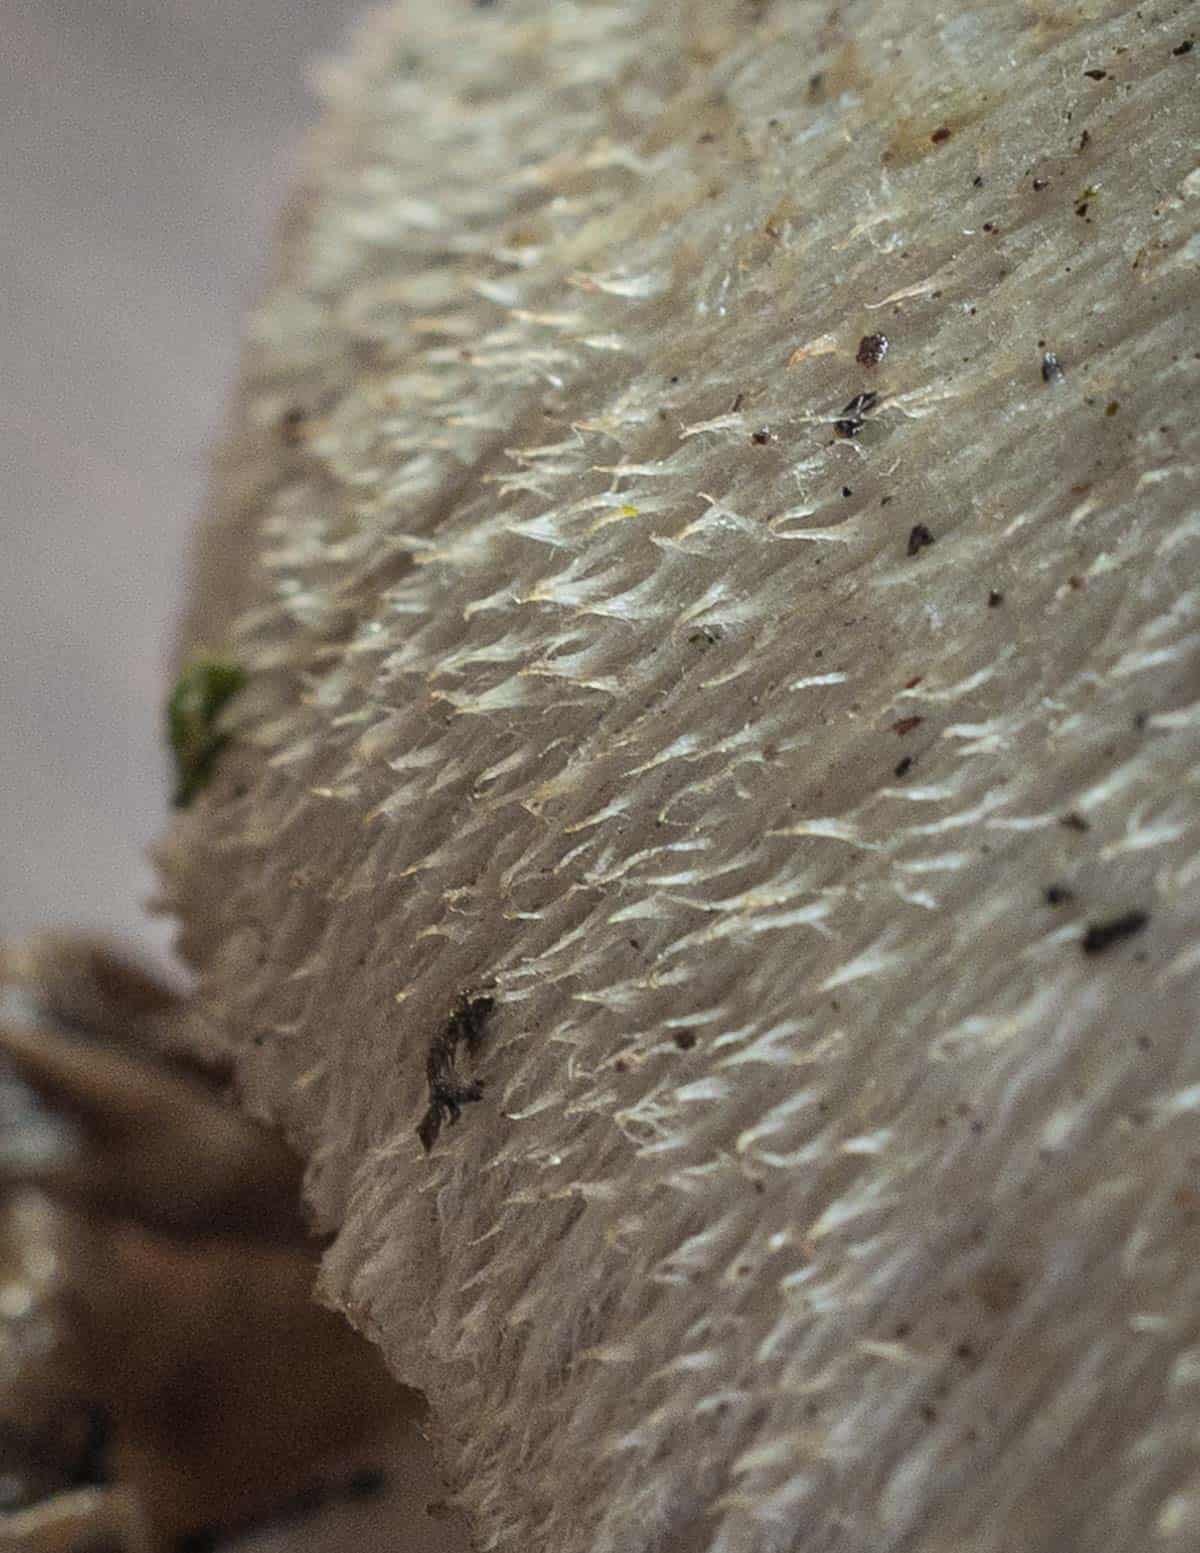 Close up image for identification of fine, silky hairs on the cap of Volvariella bombycina. 